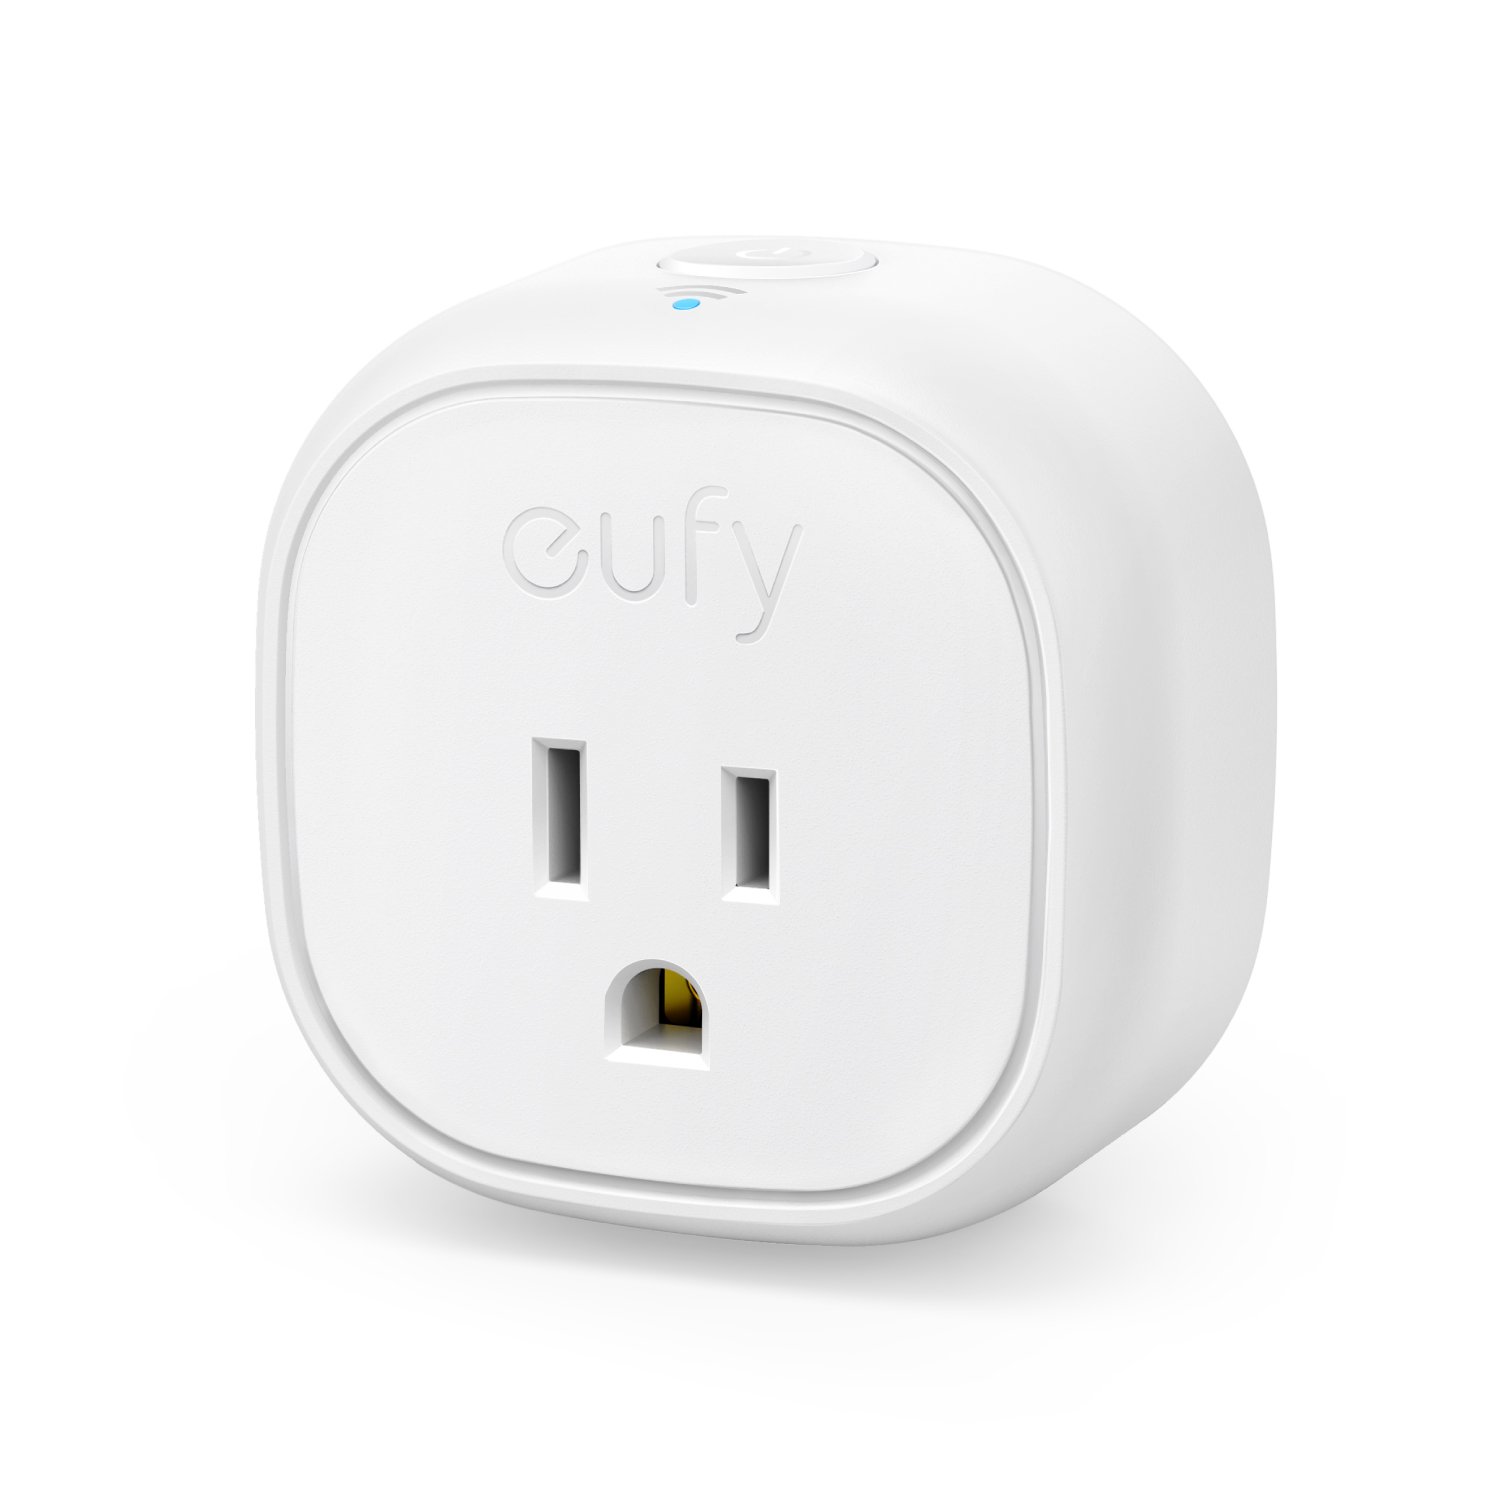 Best Smart Plugs for Alexa and Google Home: Black Friday 2019 - Deals & Buyer's Guide 7